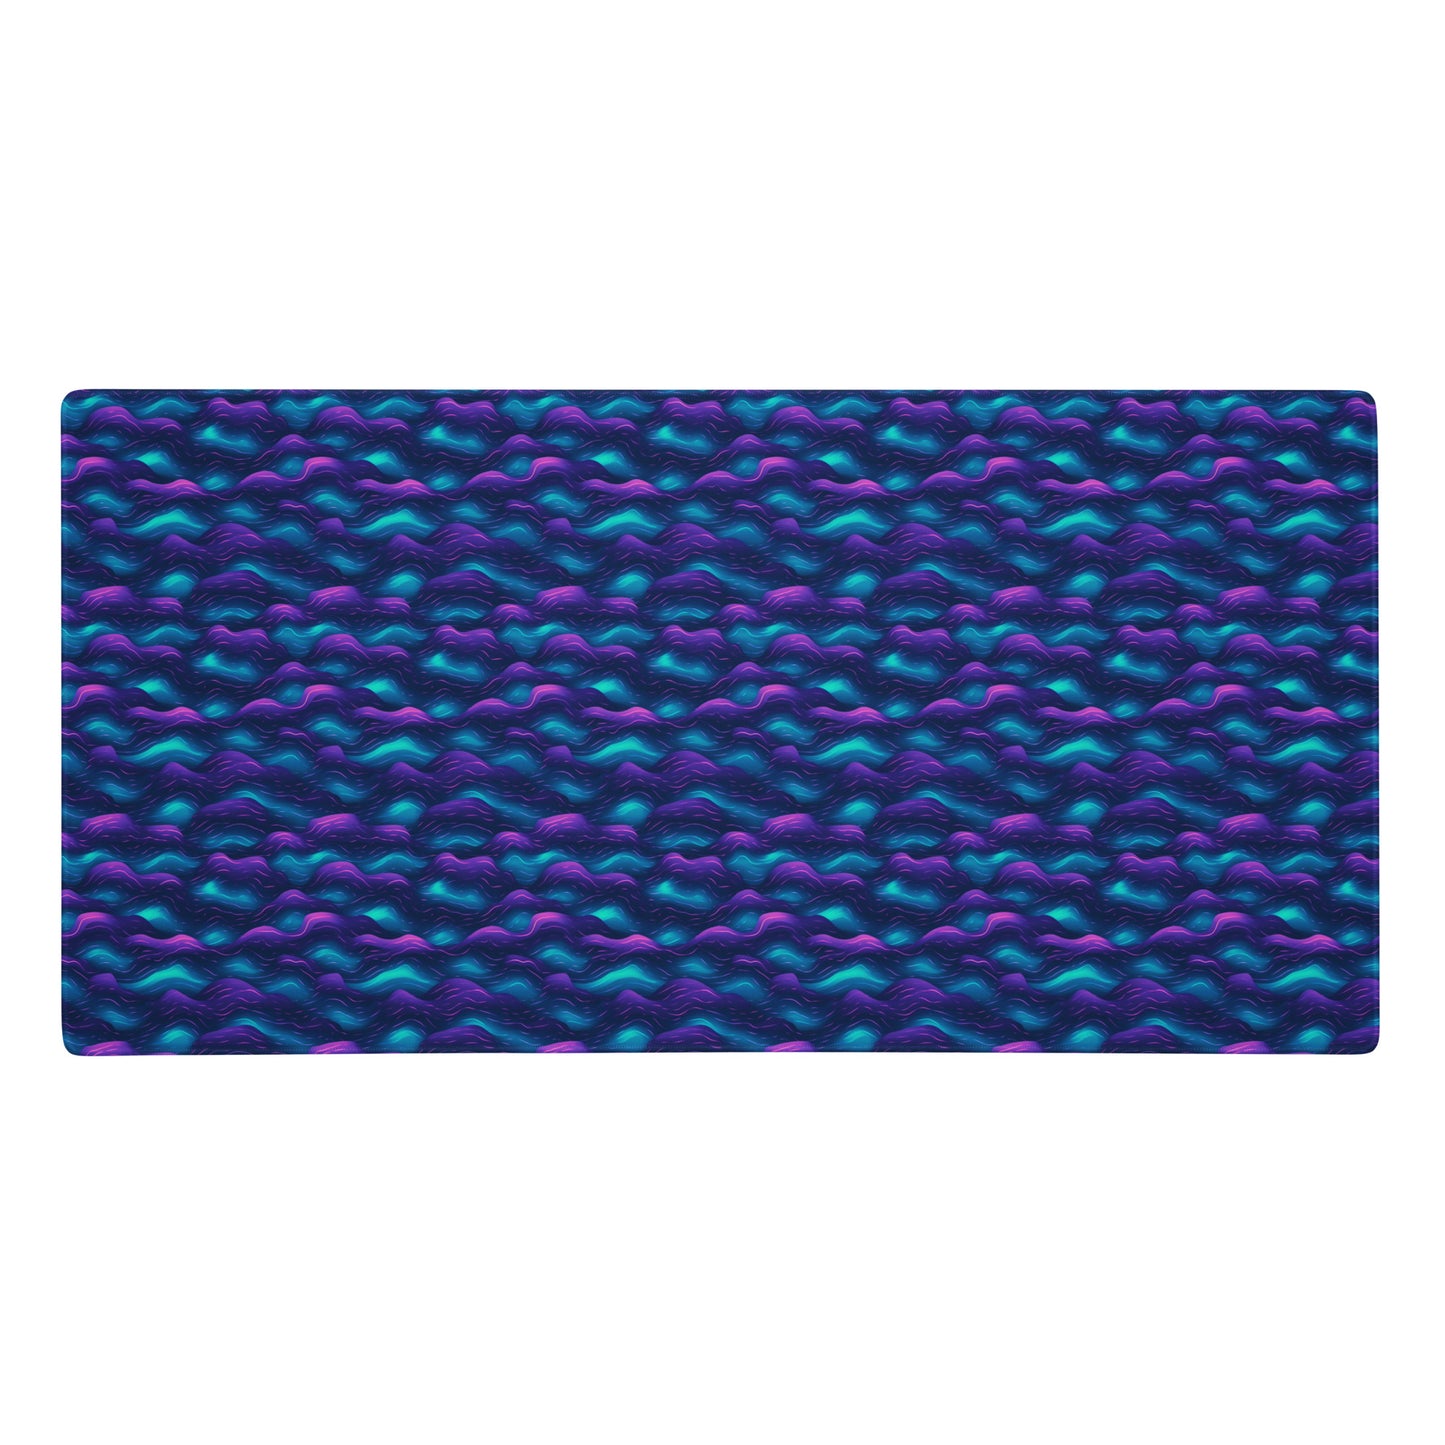 A 36" x 18" desk pad with blue and purple wave pattern.